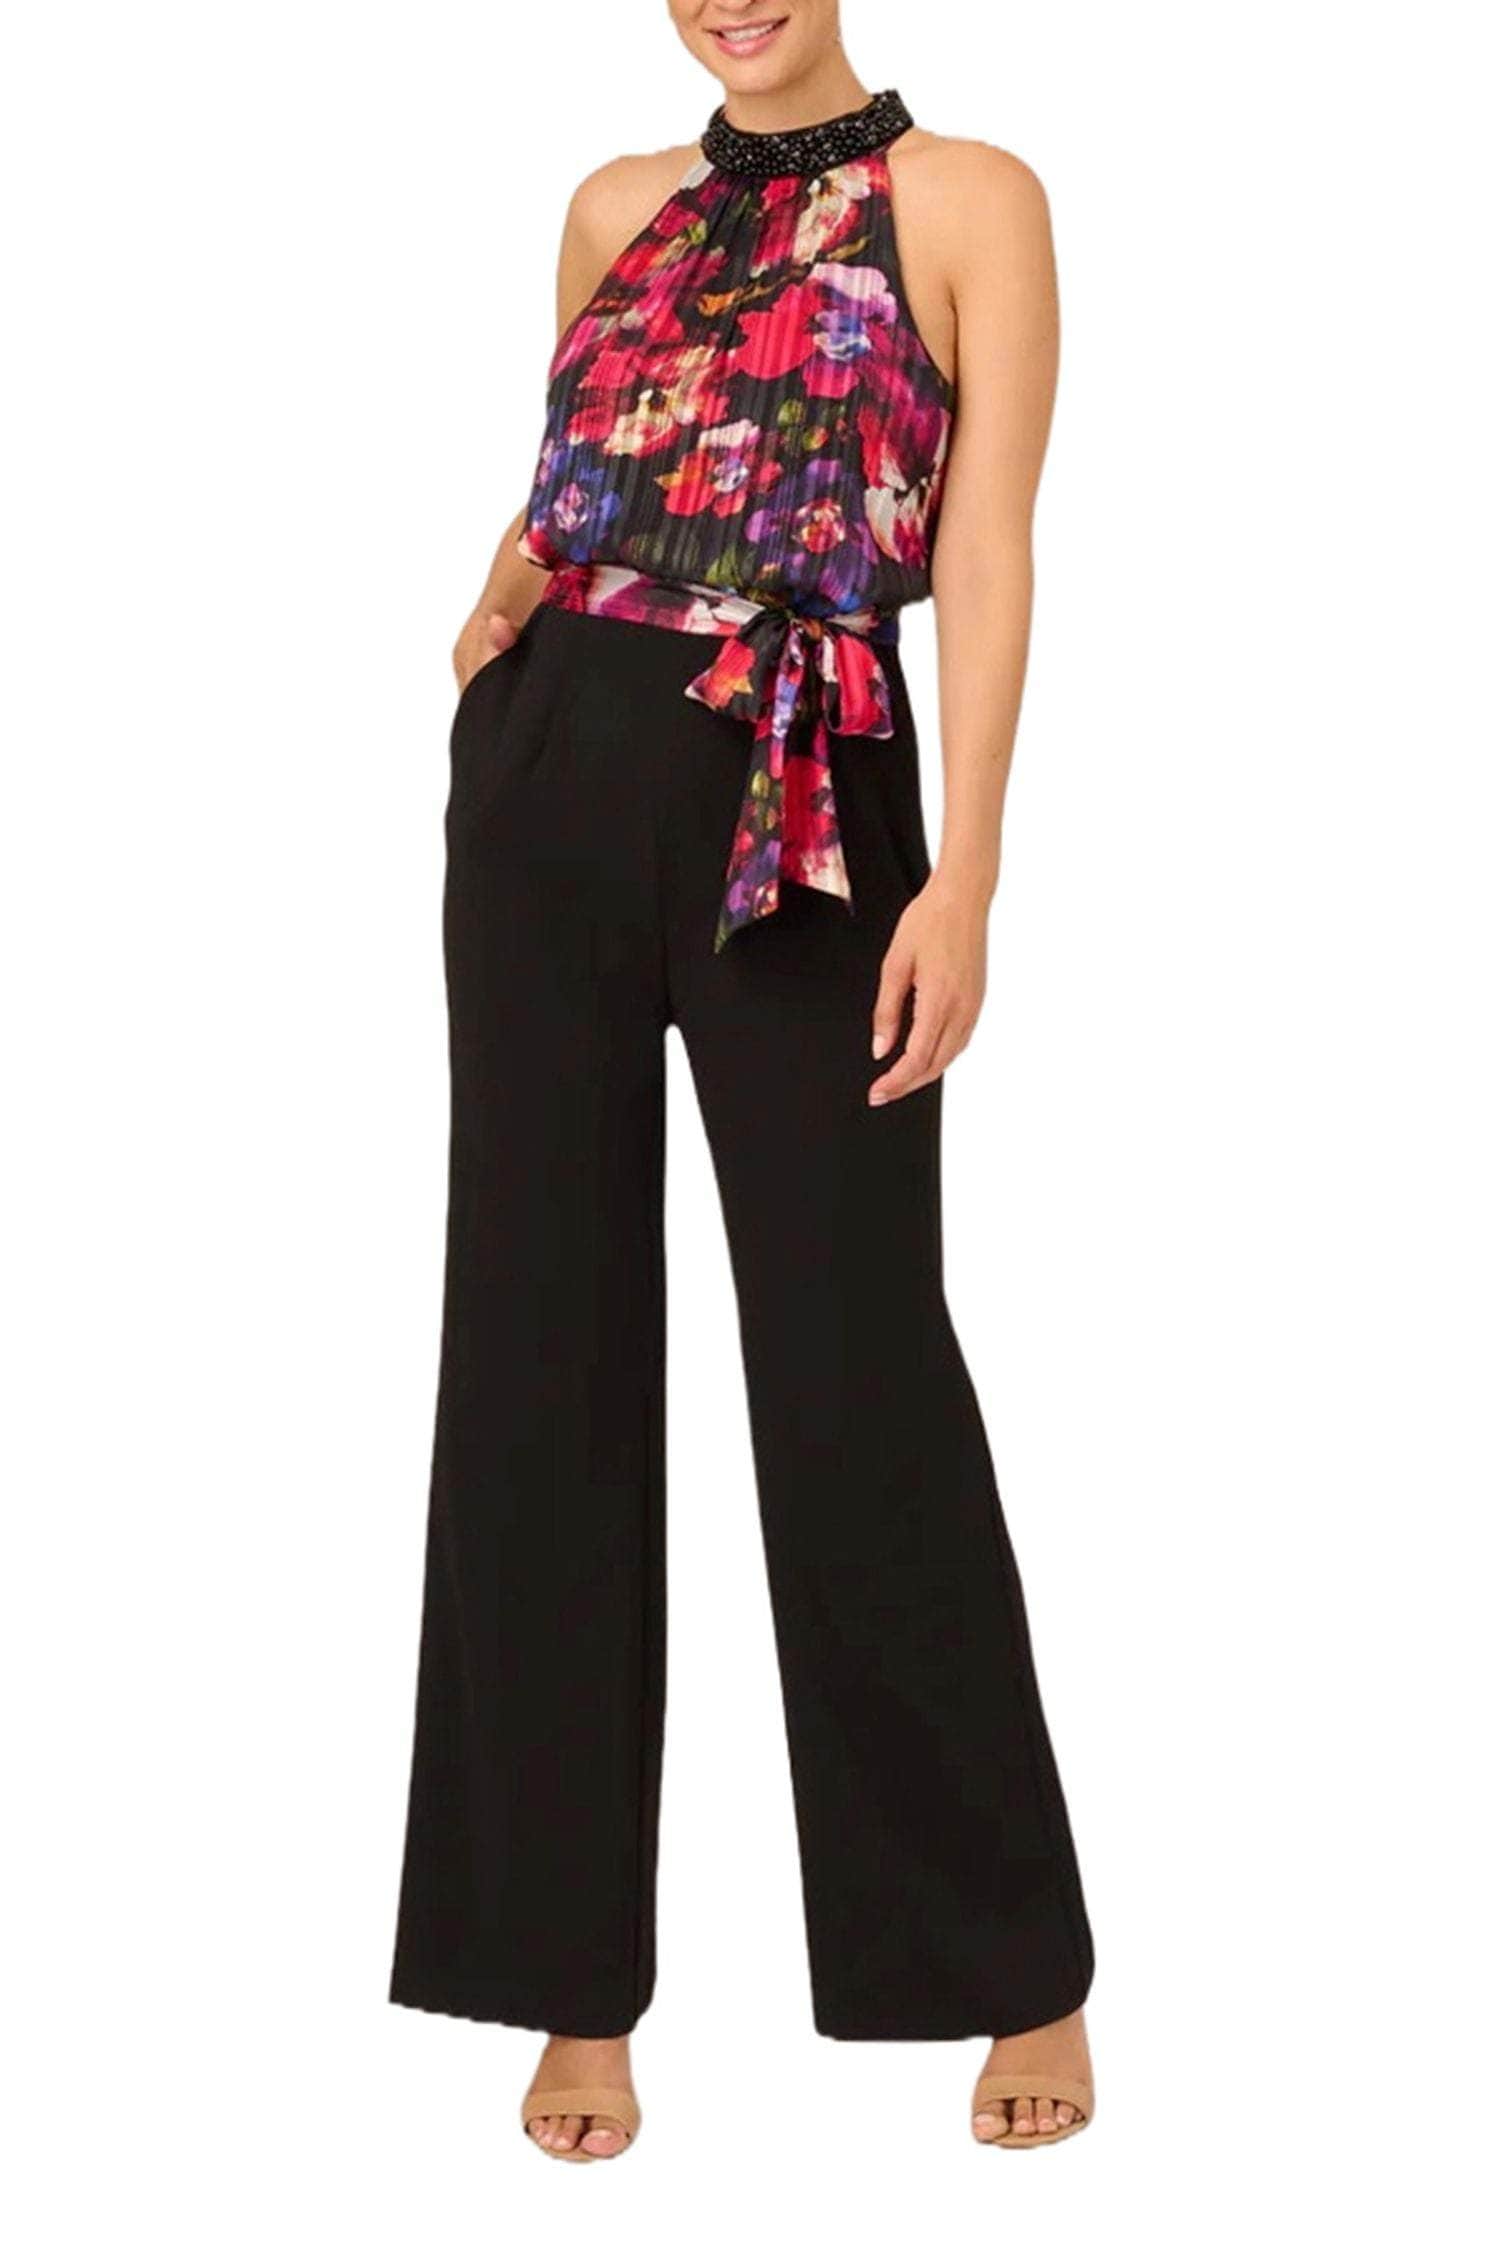 Image of Adrianna Papell AP1E210757 - Pleated Floral Print Halter Pantsuit